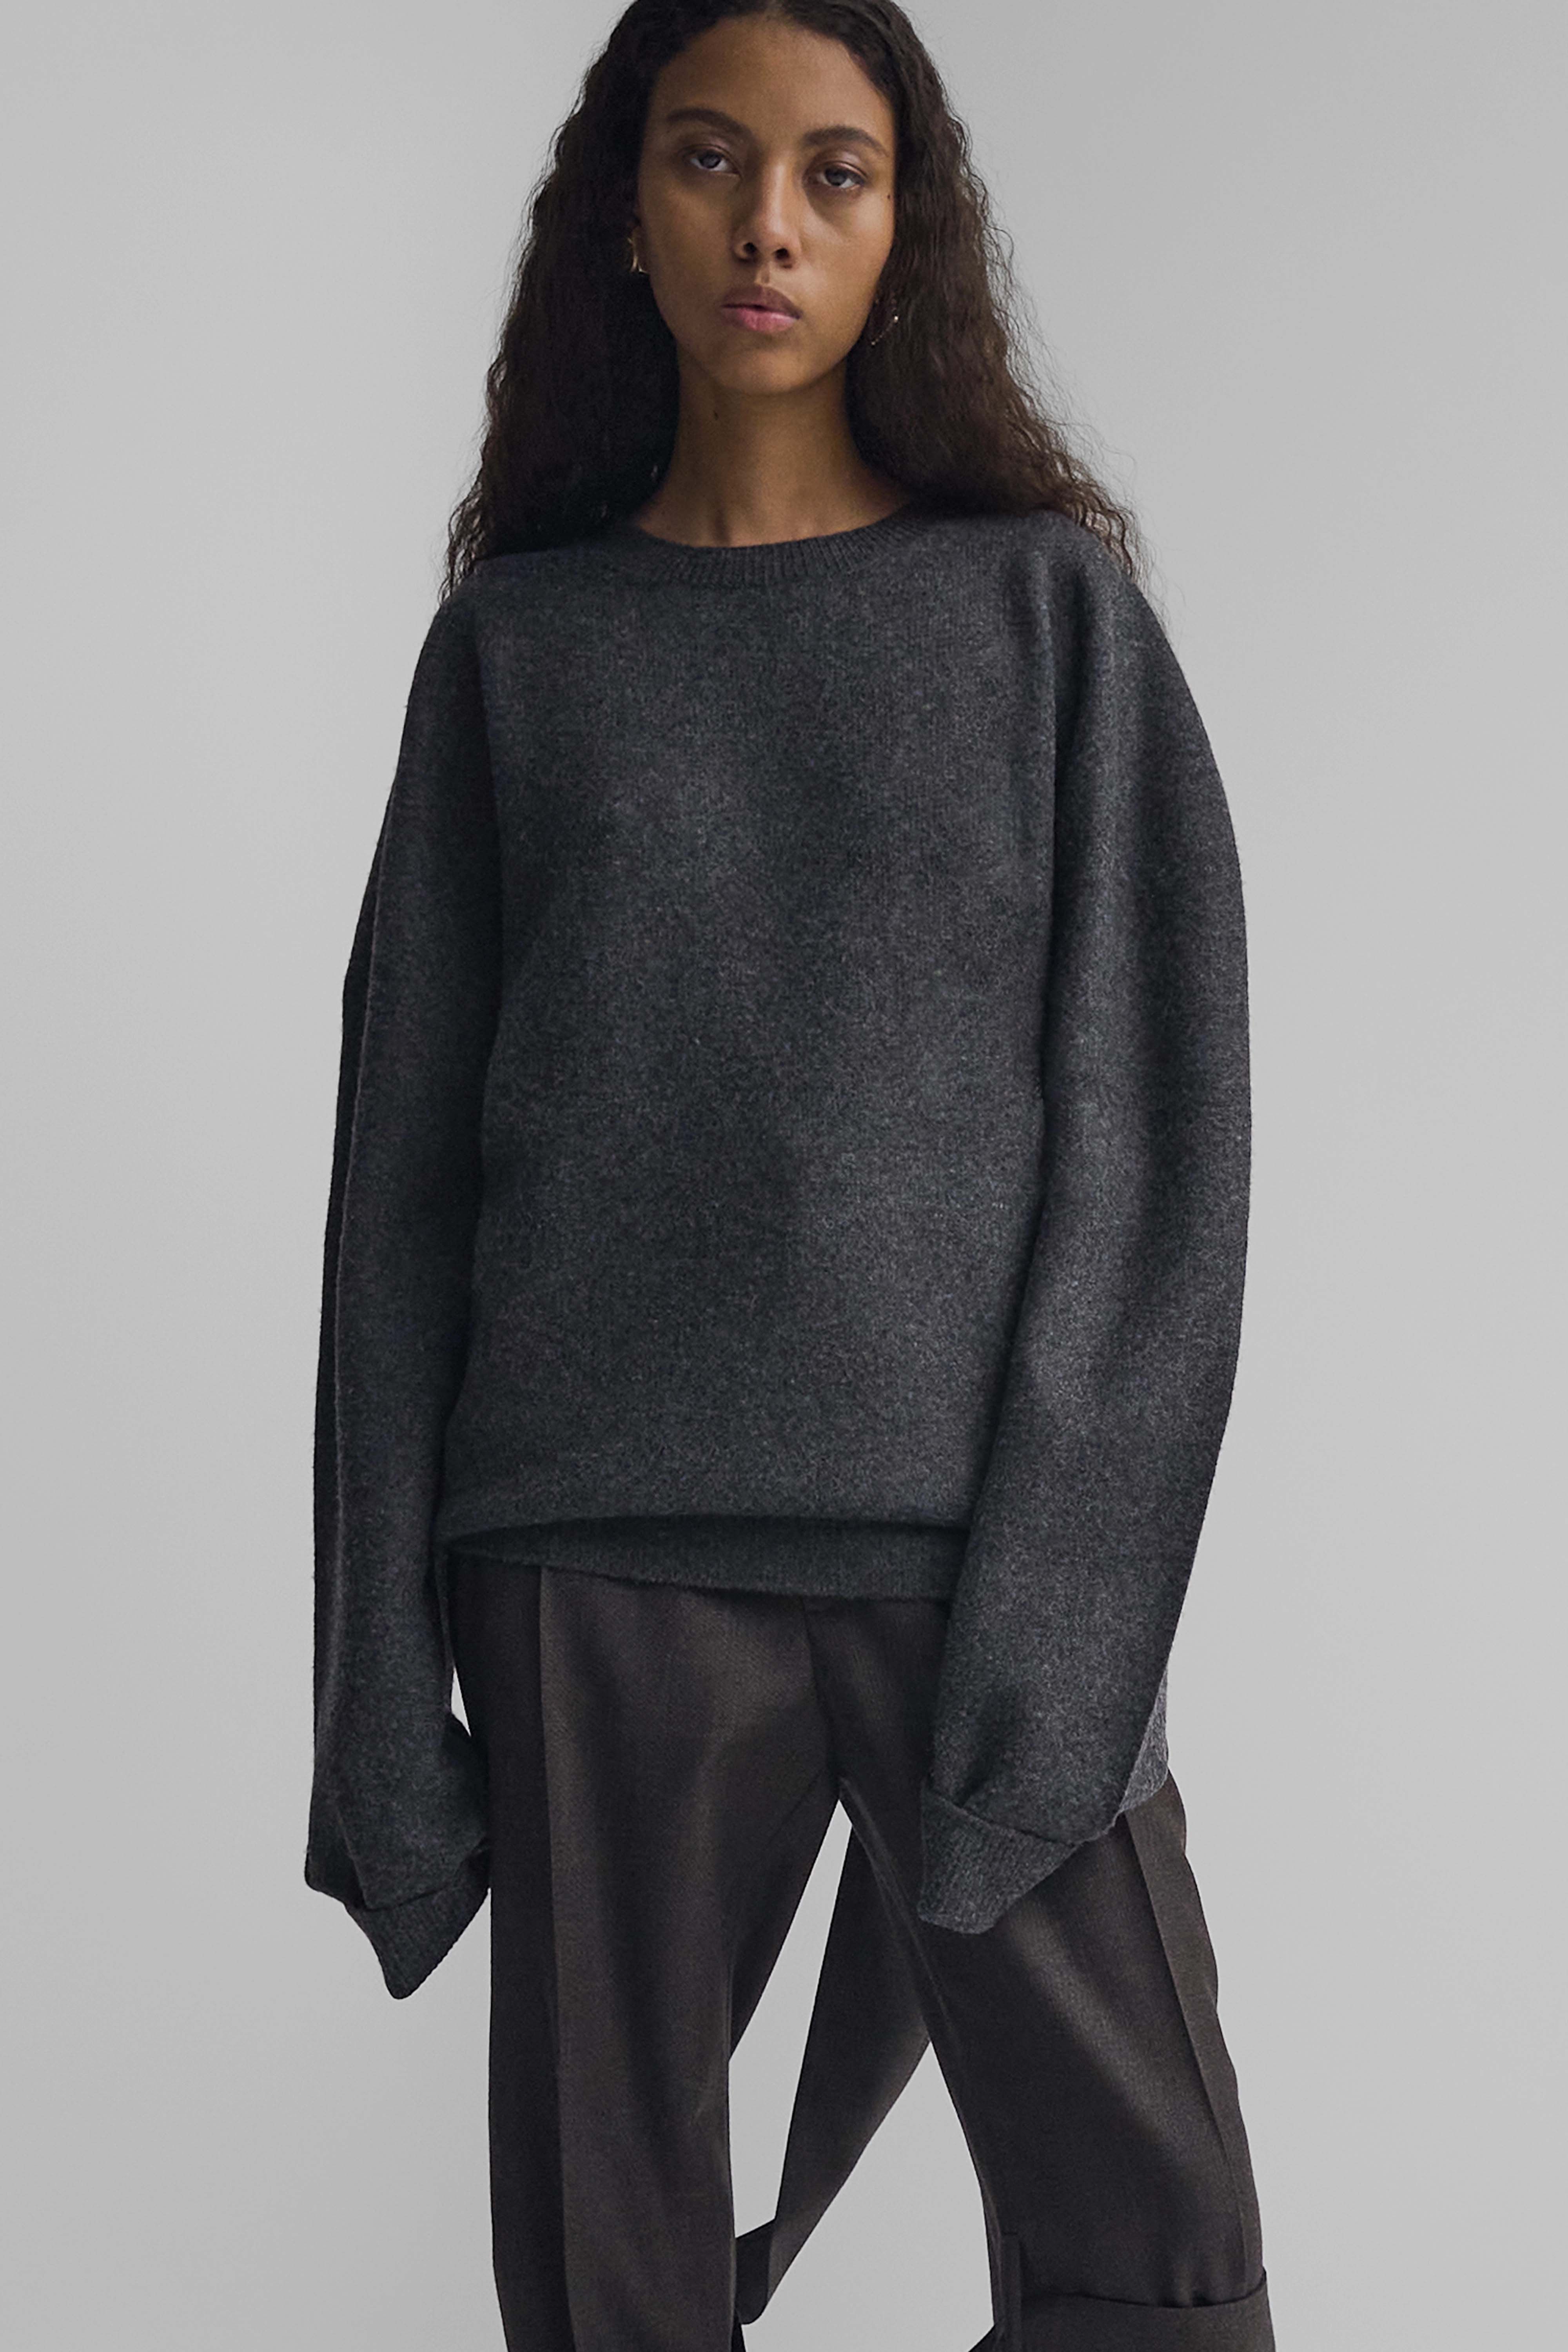 Phoebe Philo's Most Anticipated Brand Is Finally Out - Ciin Magazine